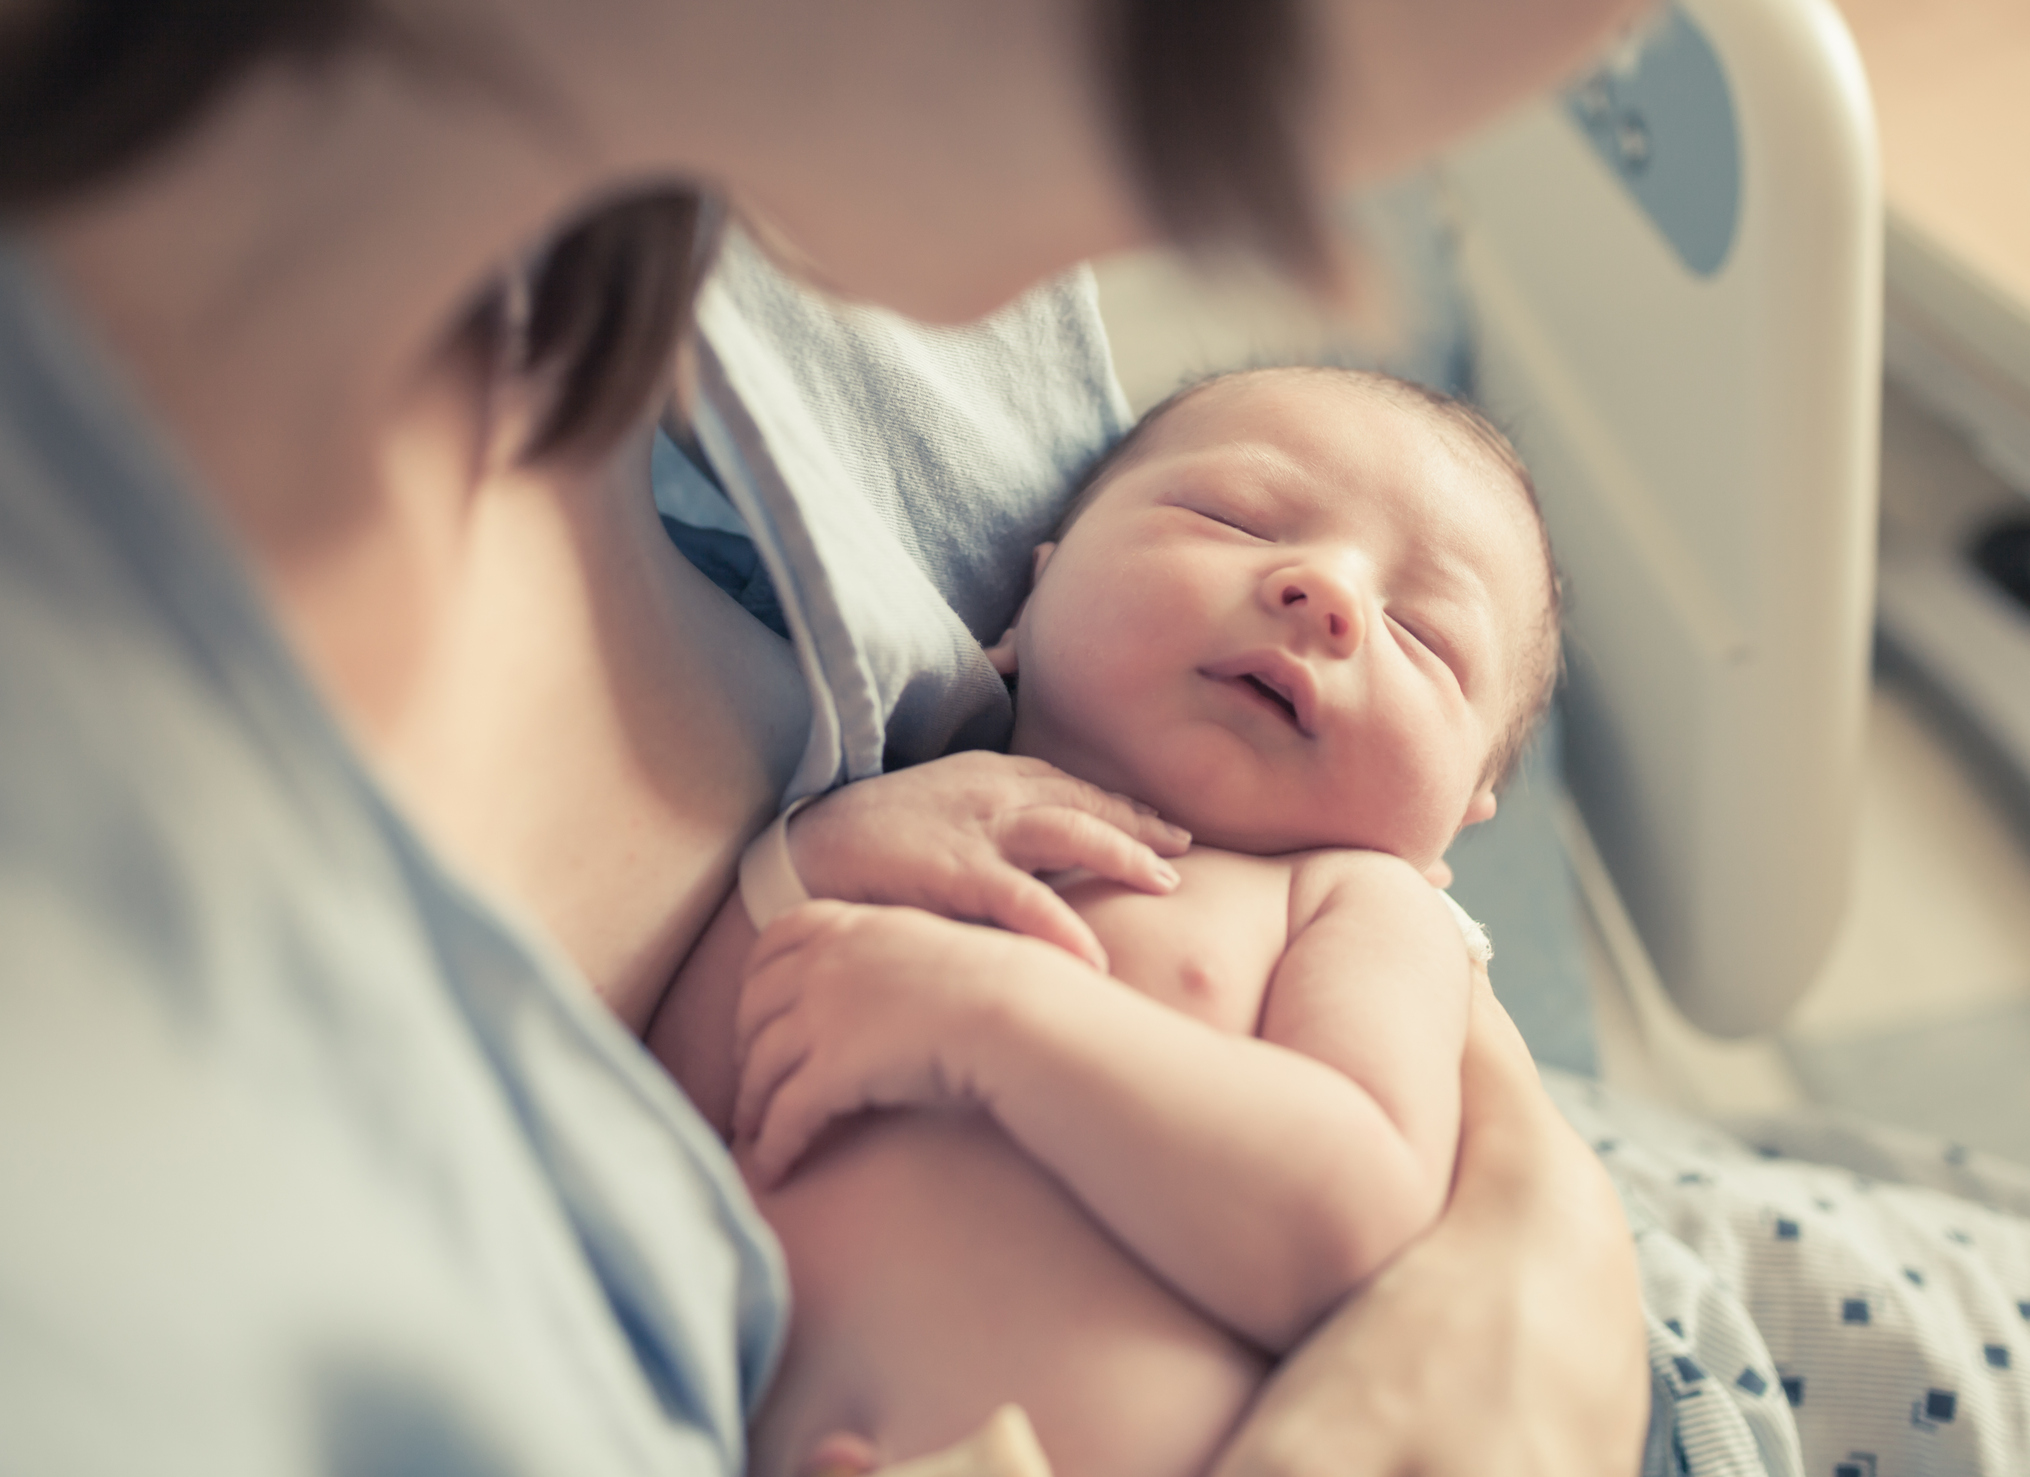 Early C-section less harmful than we thought